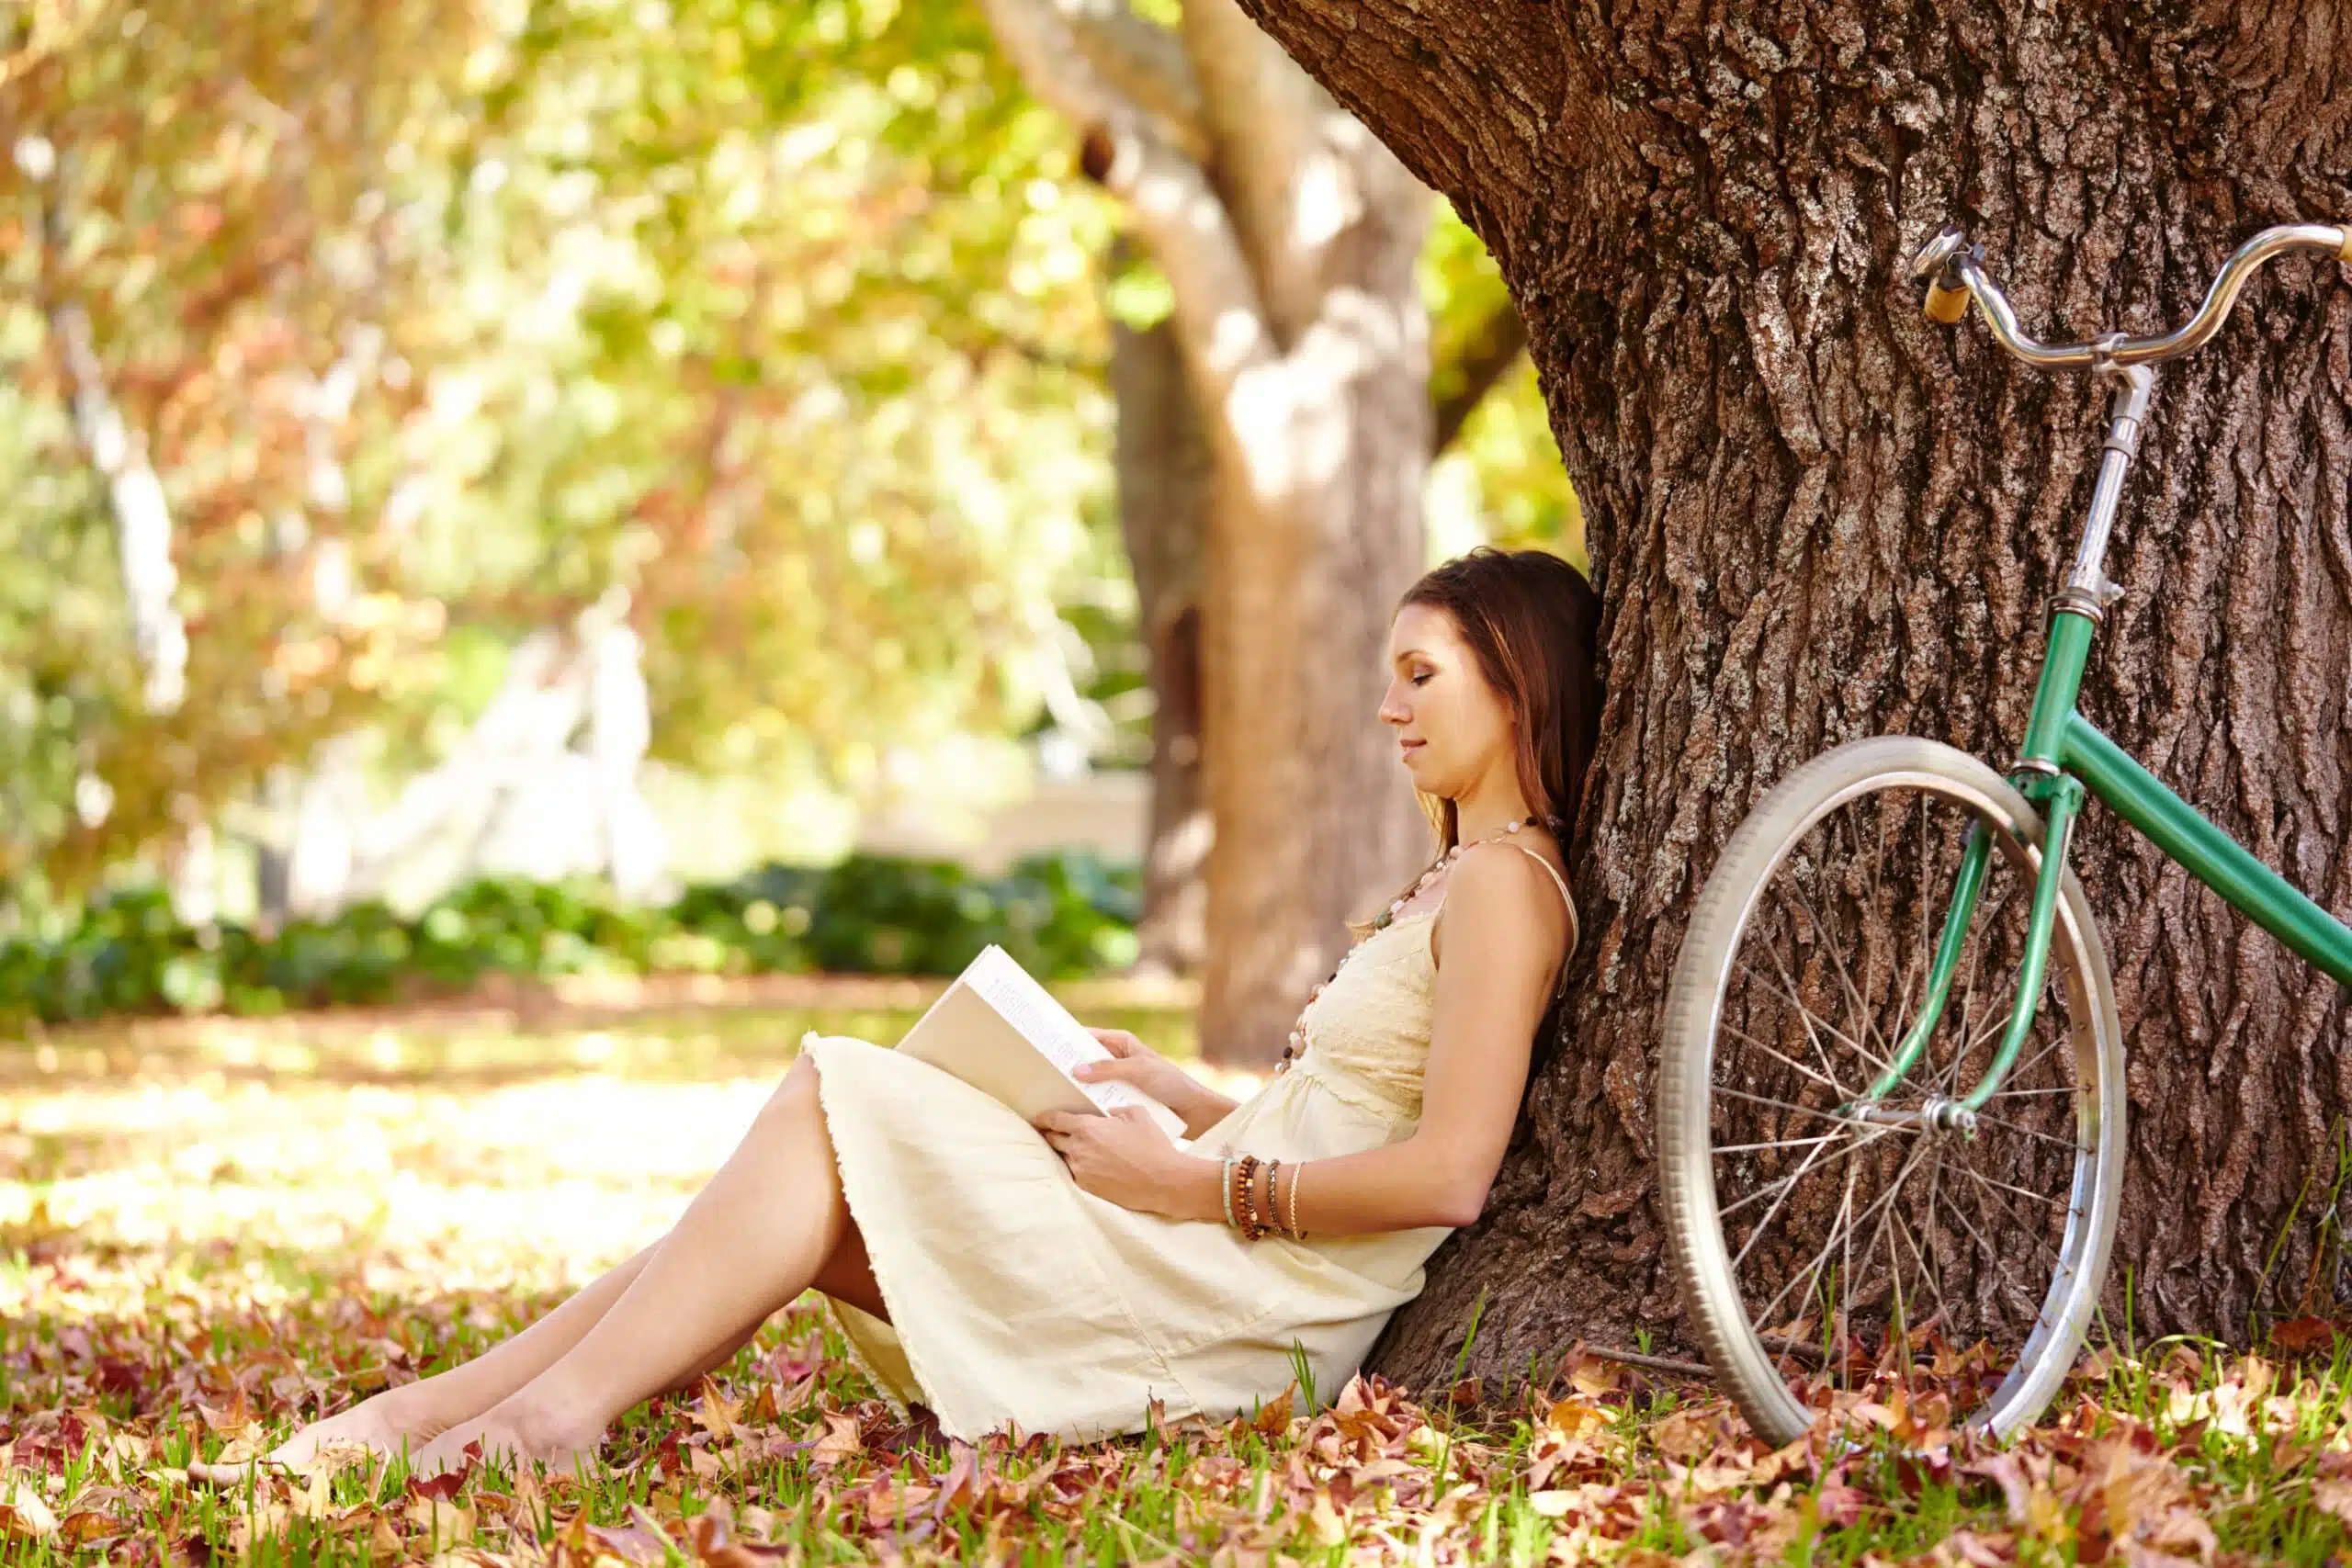 Woman leaning on a tree and sitting on the ground reading a book